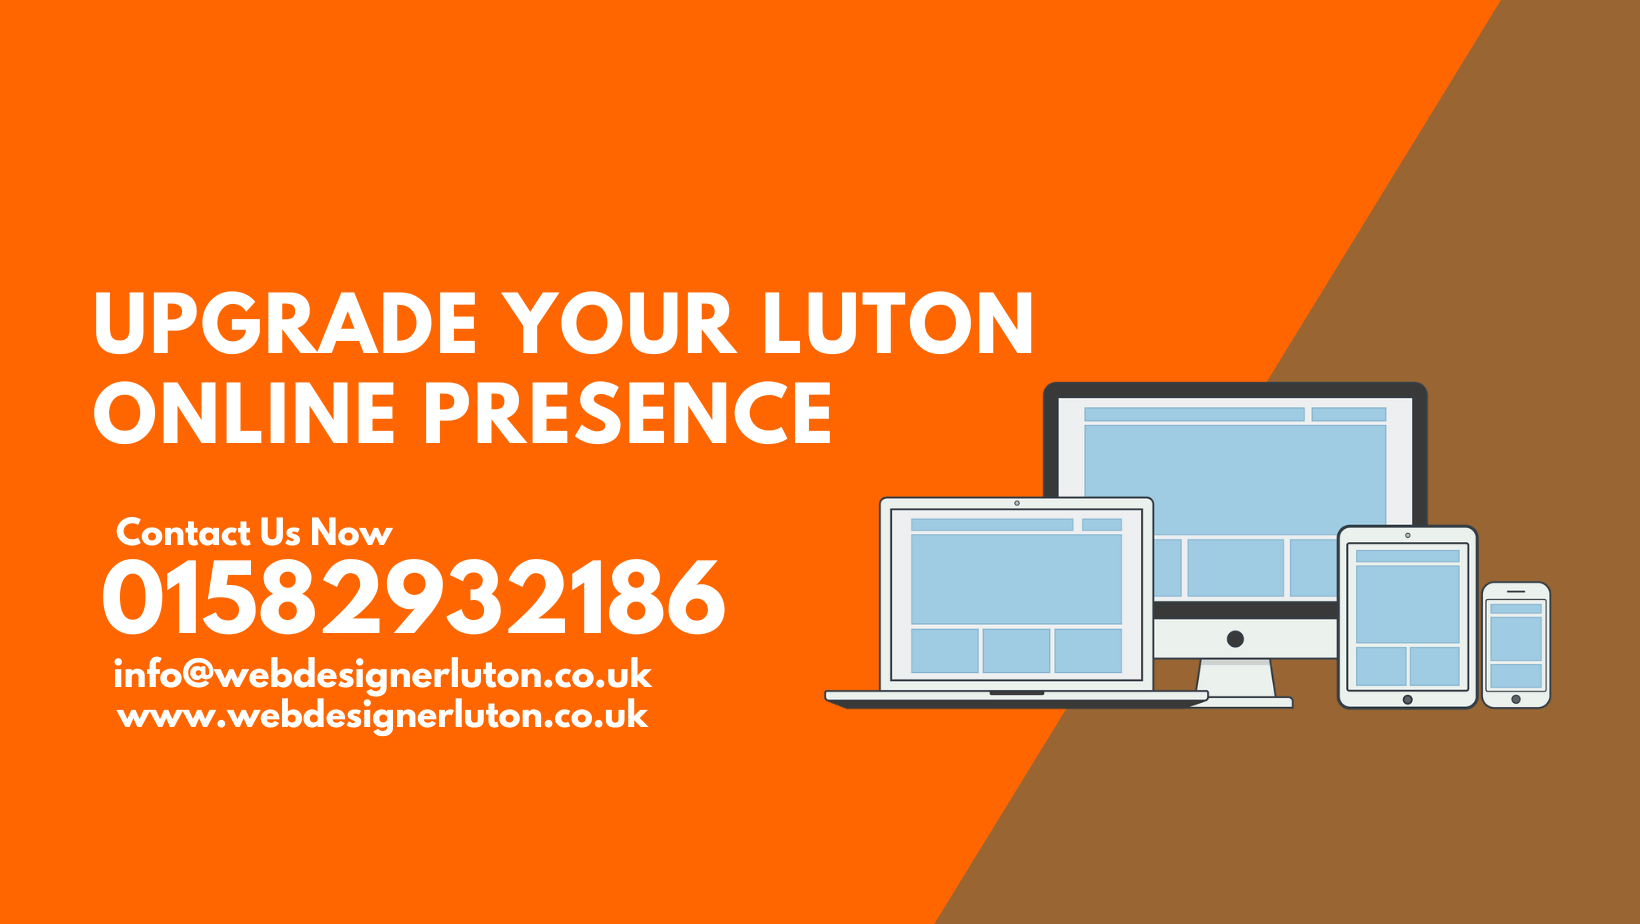 Upgrade Your Luton Online Presence: Web Design with Results